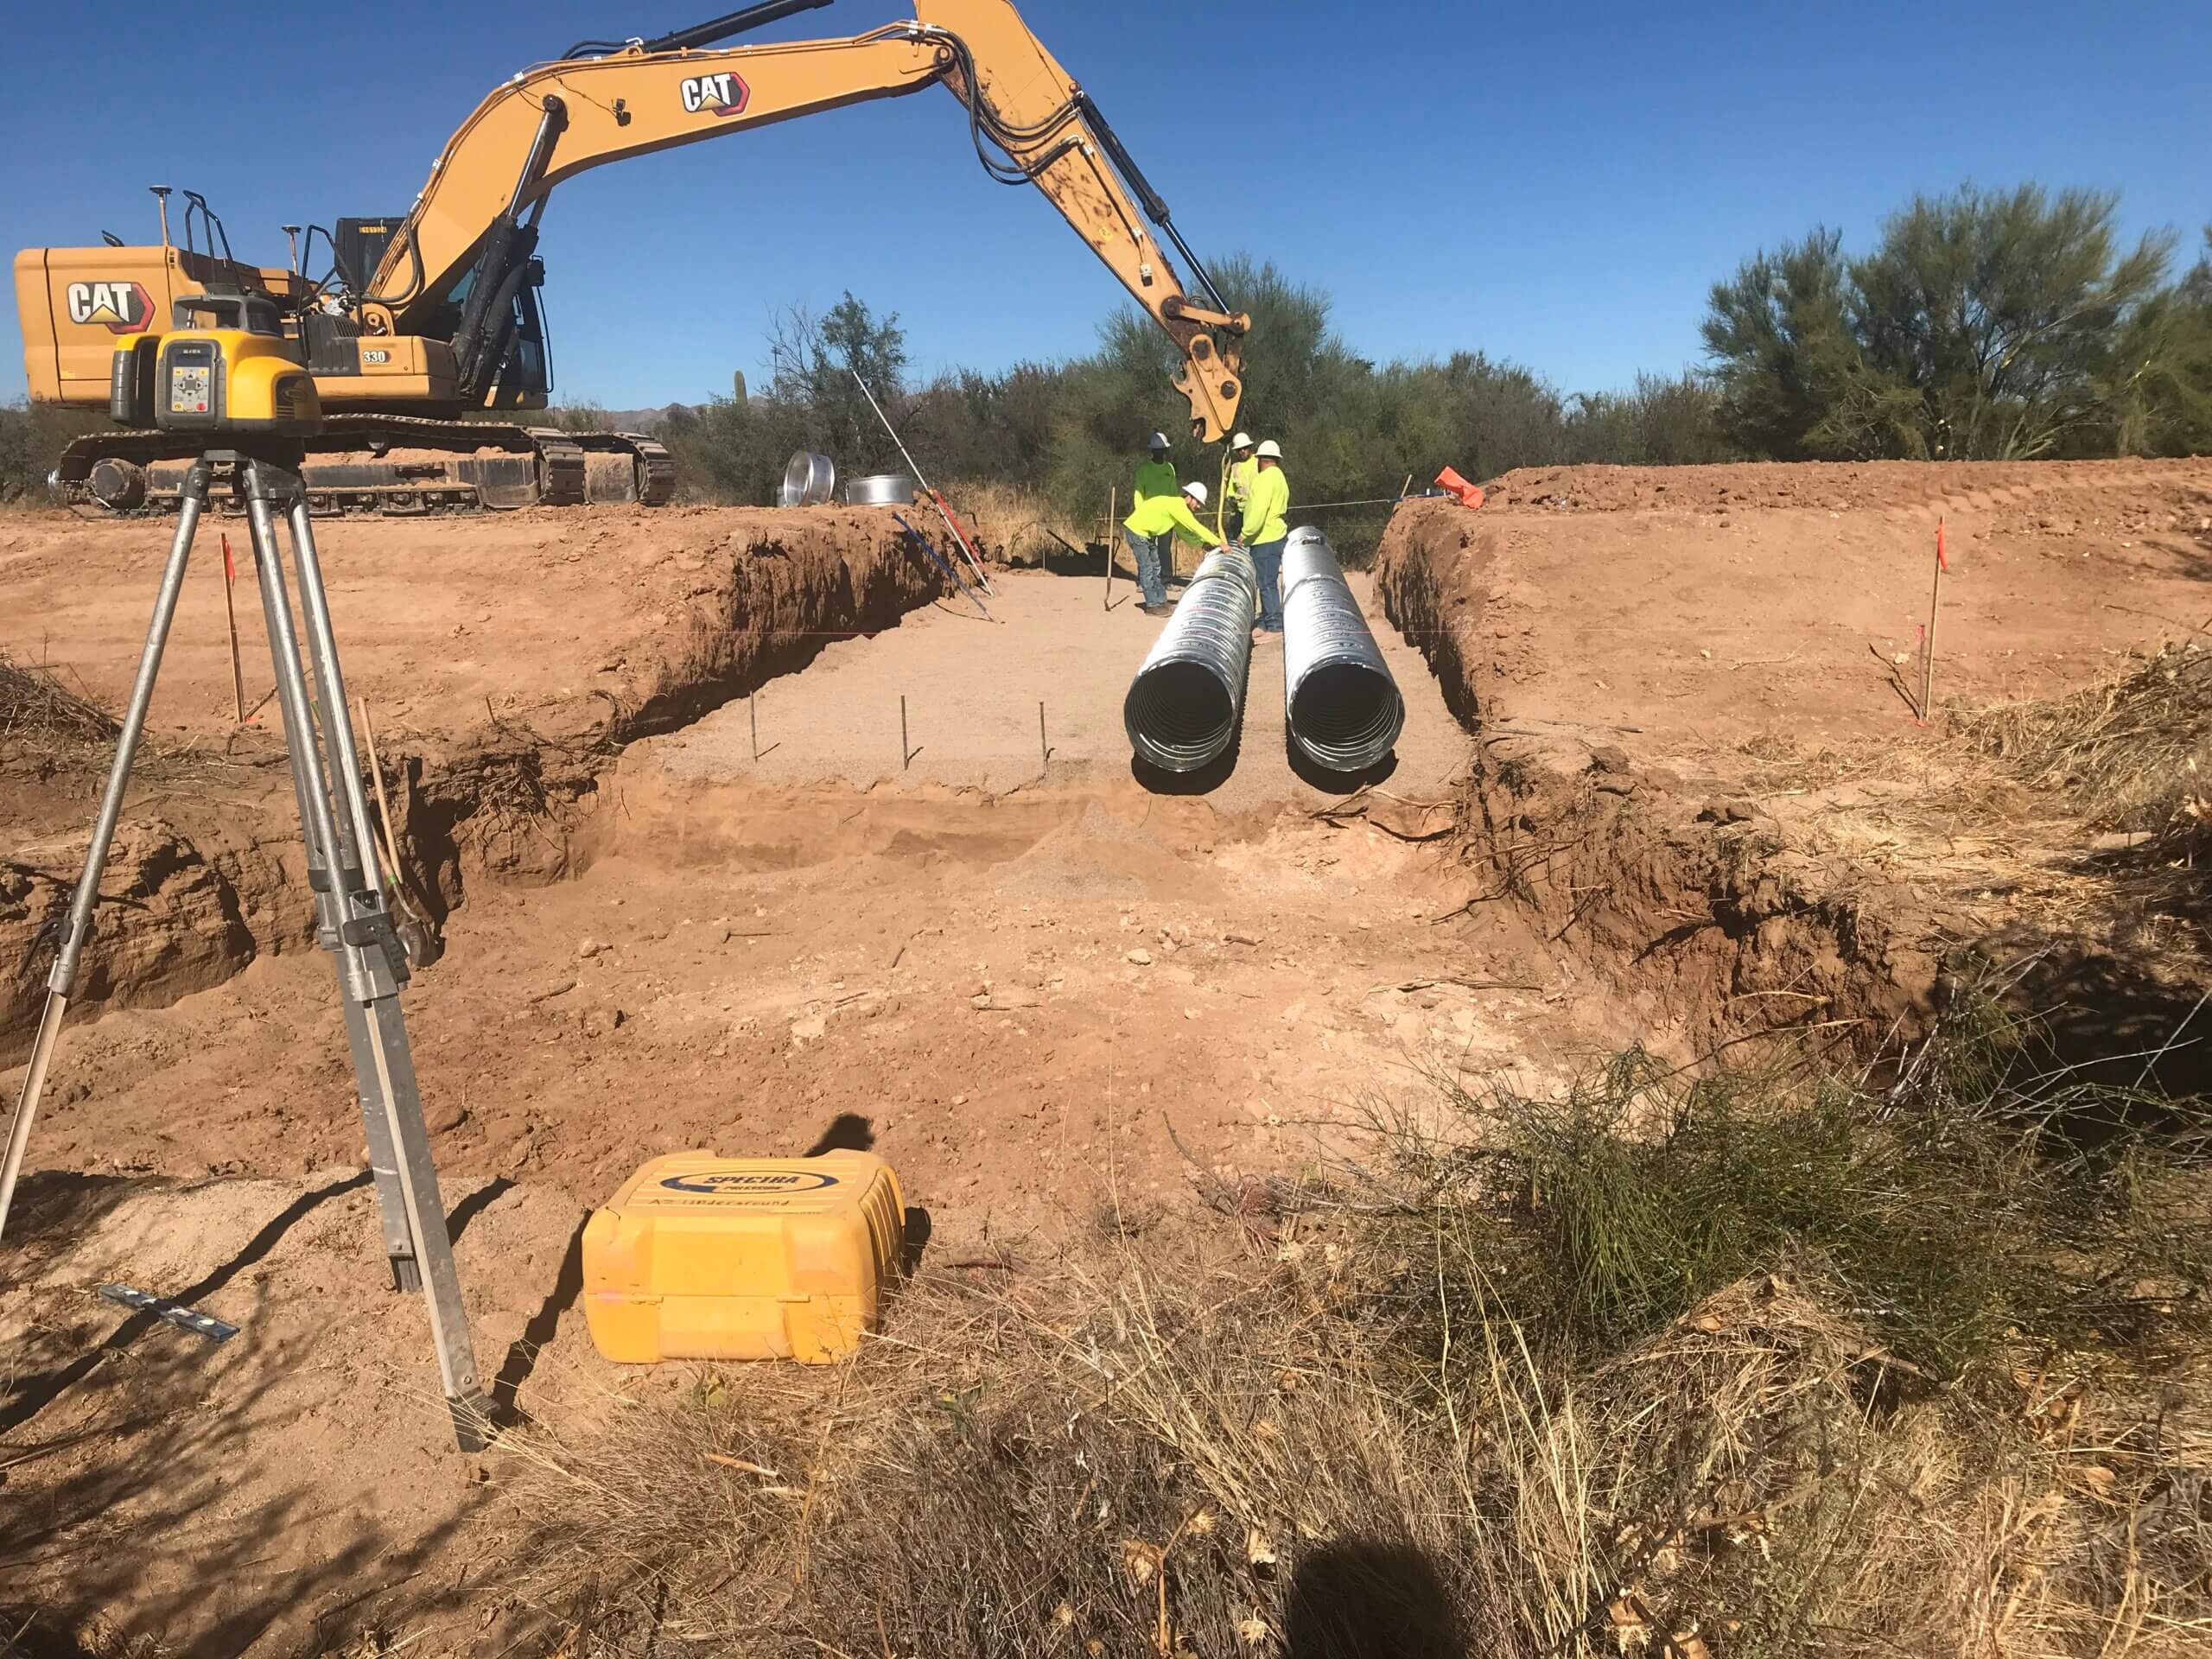 Land surveying equipment set up at a job site aimed at an excavator and pipes